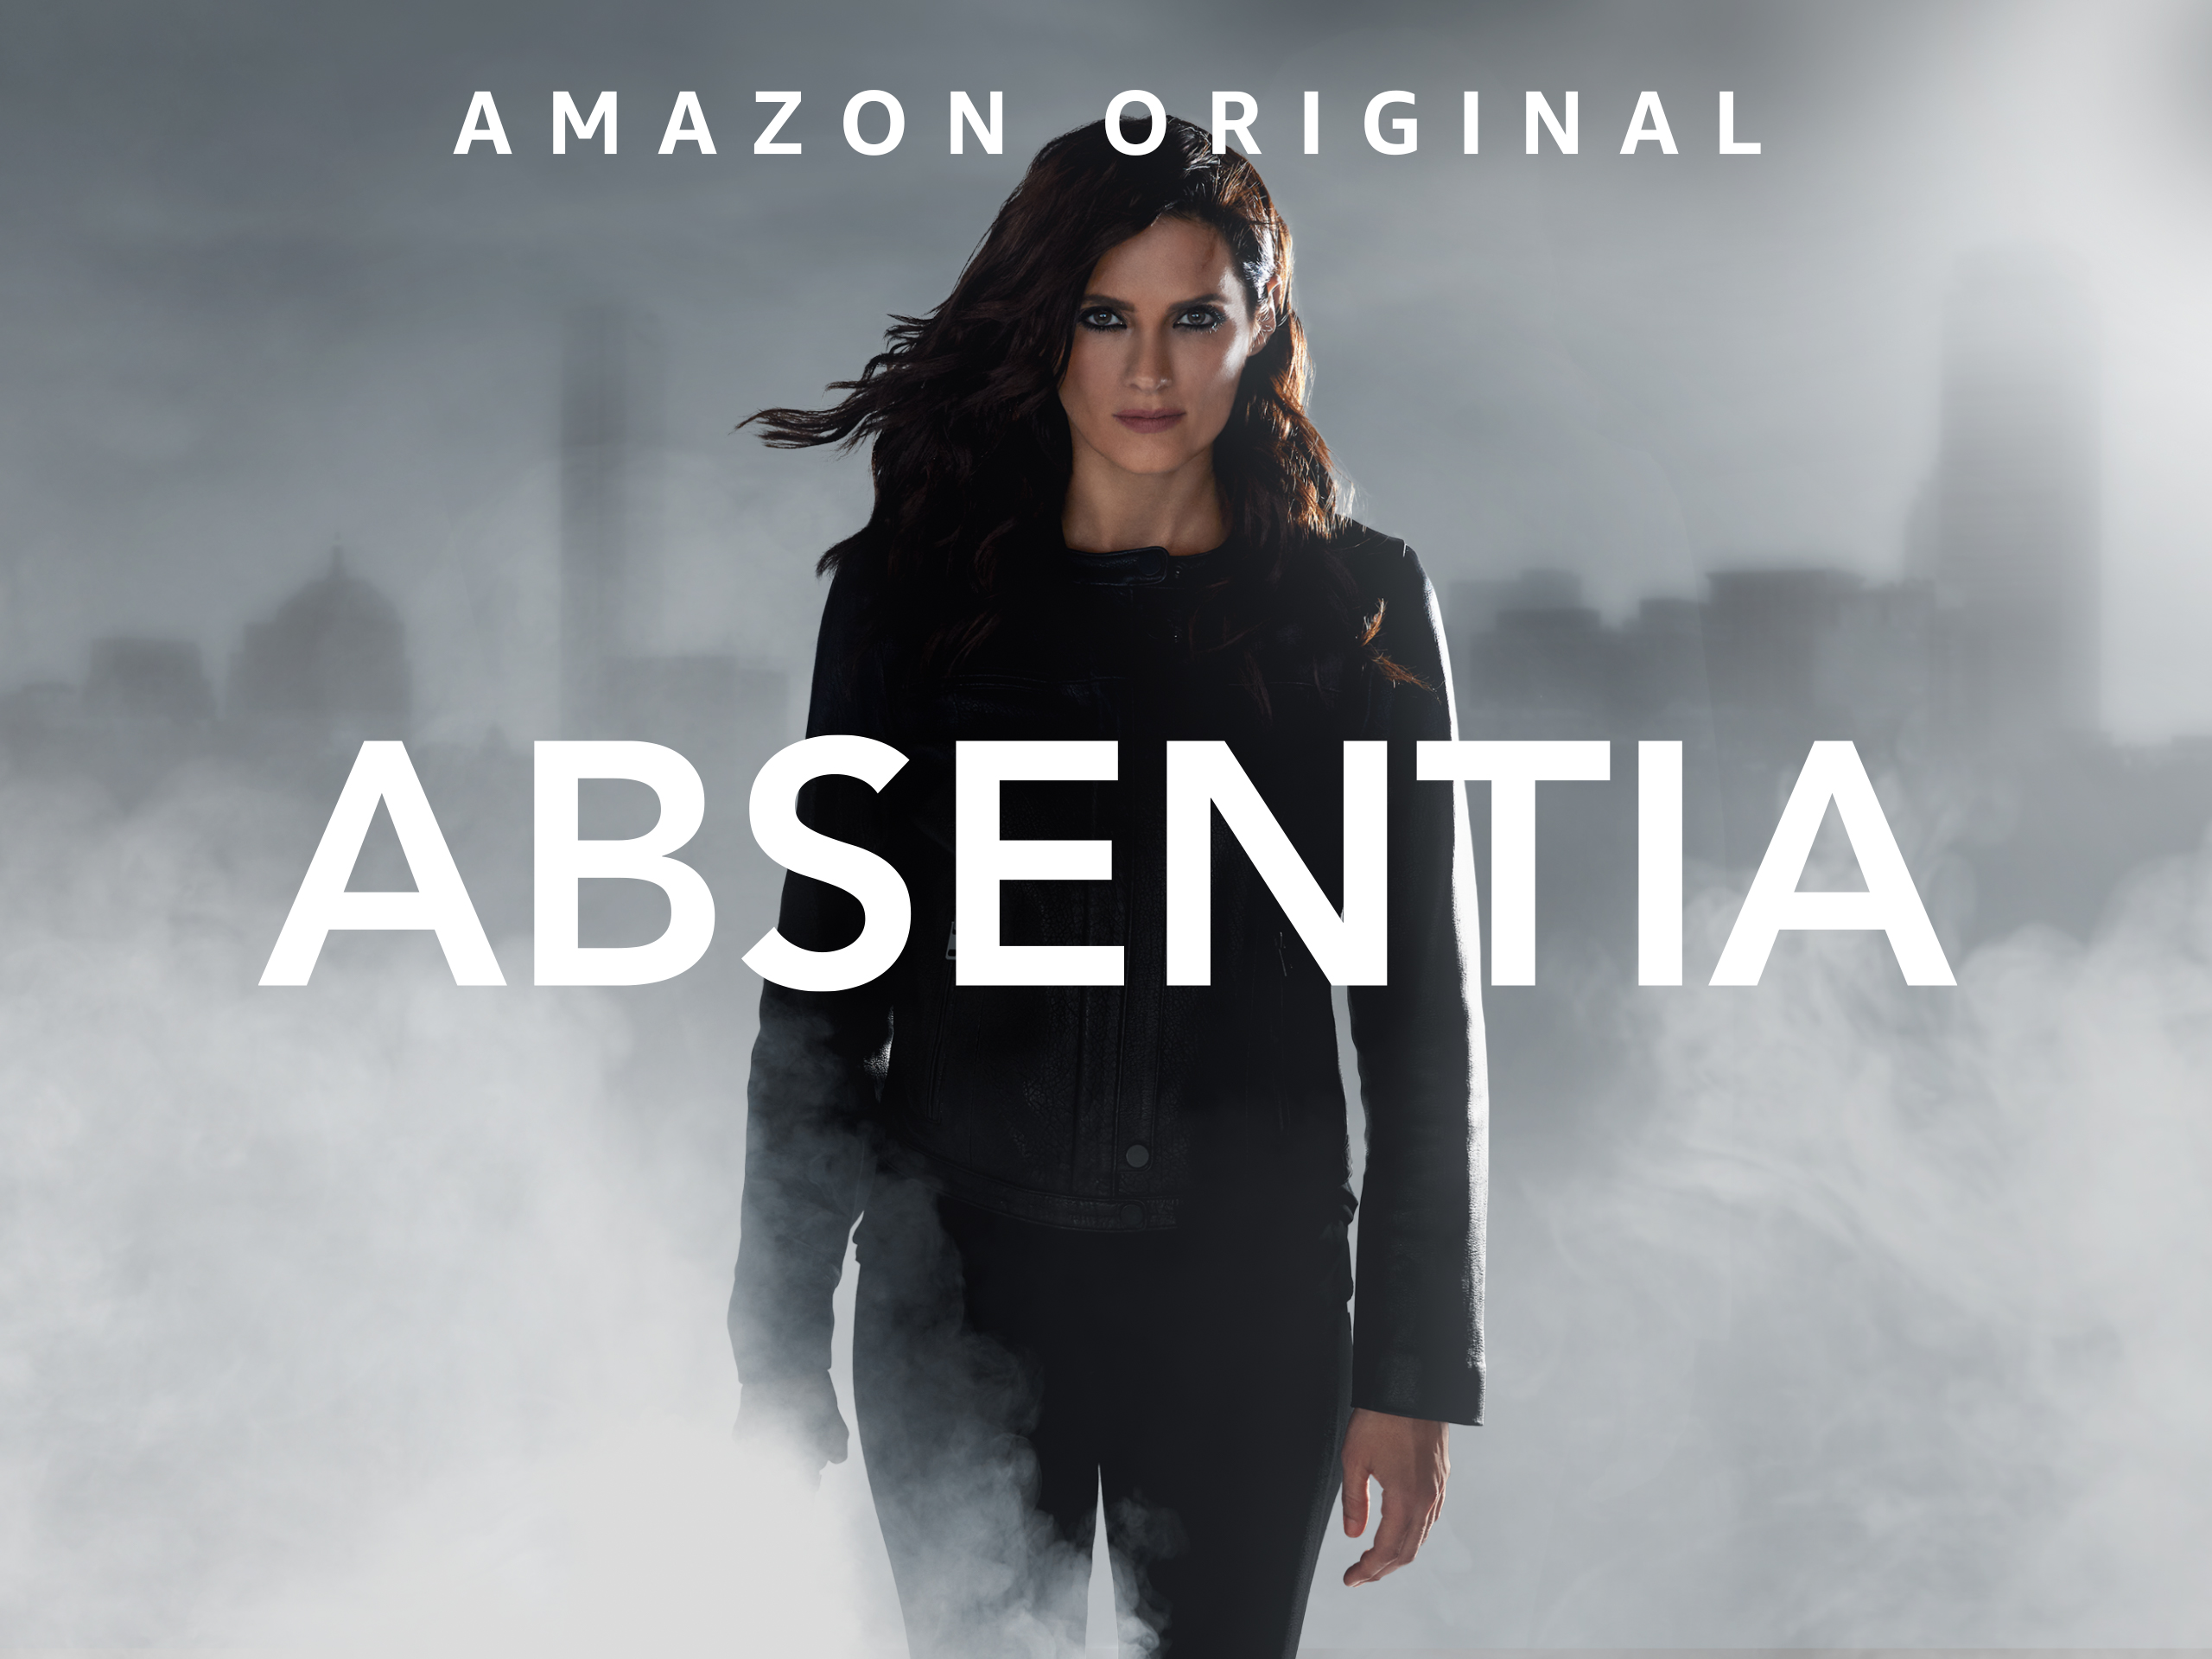 Absentia Poster Wallpapers